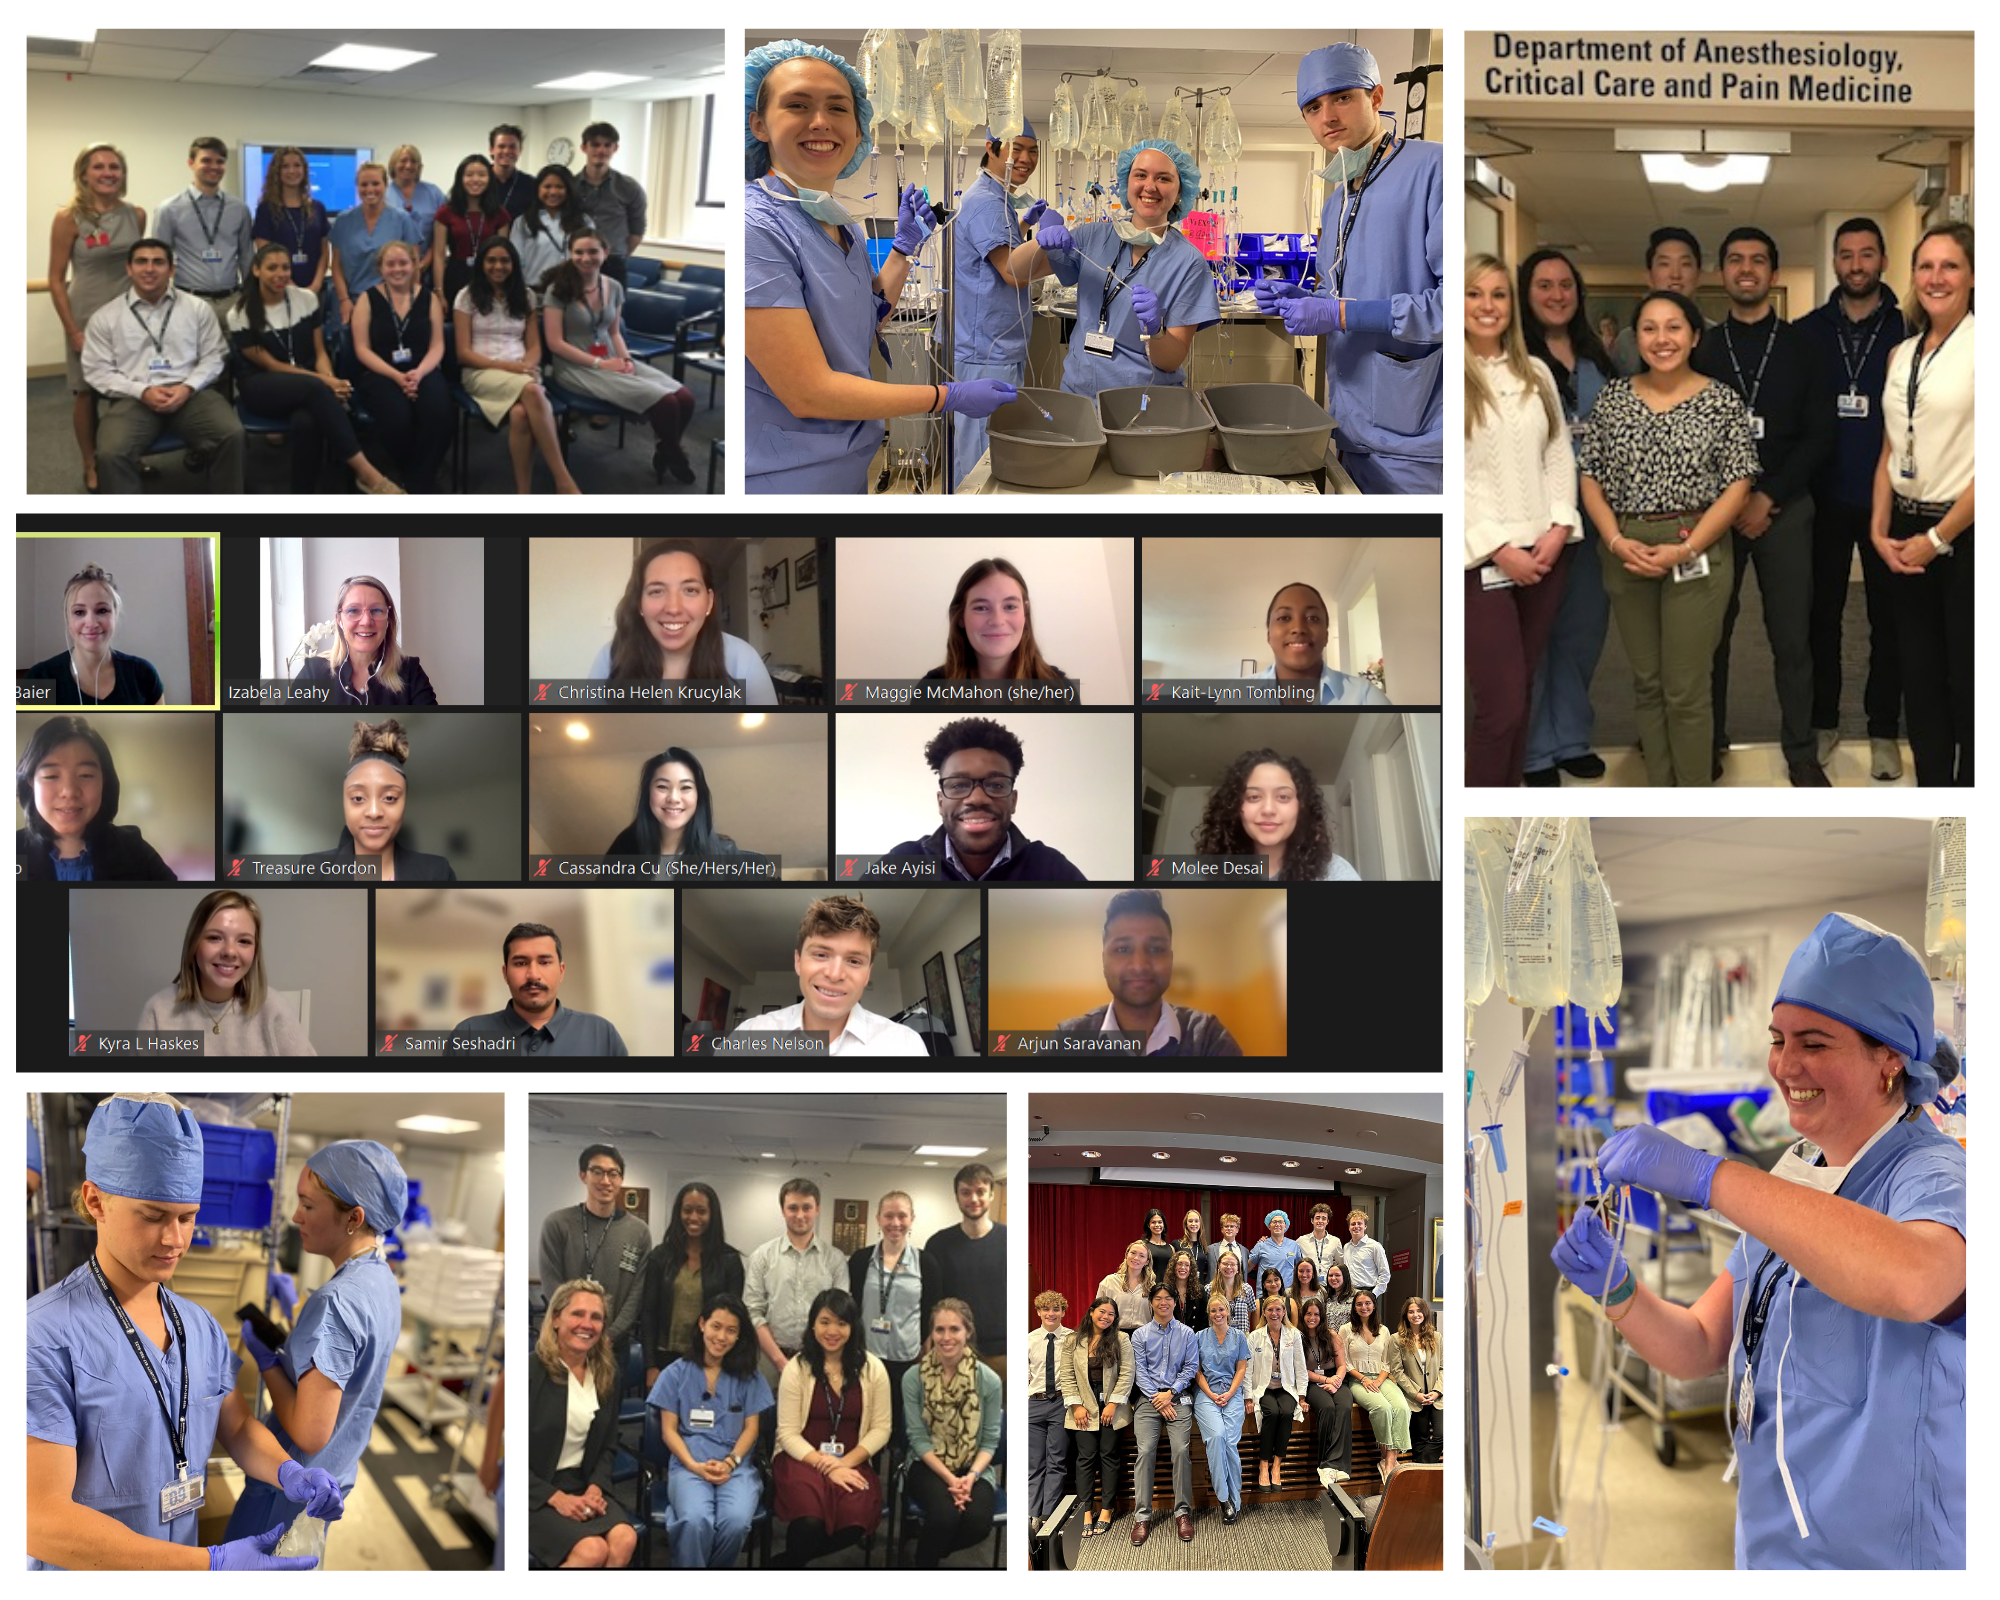 Eight photos of PACaRI interns in a collage format. In the middle is a screenshot of the interns on zoom and surrounding that image is photos of the interns in their scrubs doing different tasks or posing for the camera in groups.